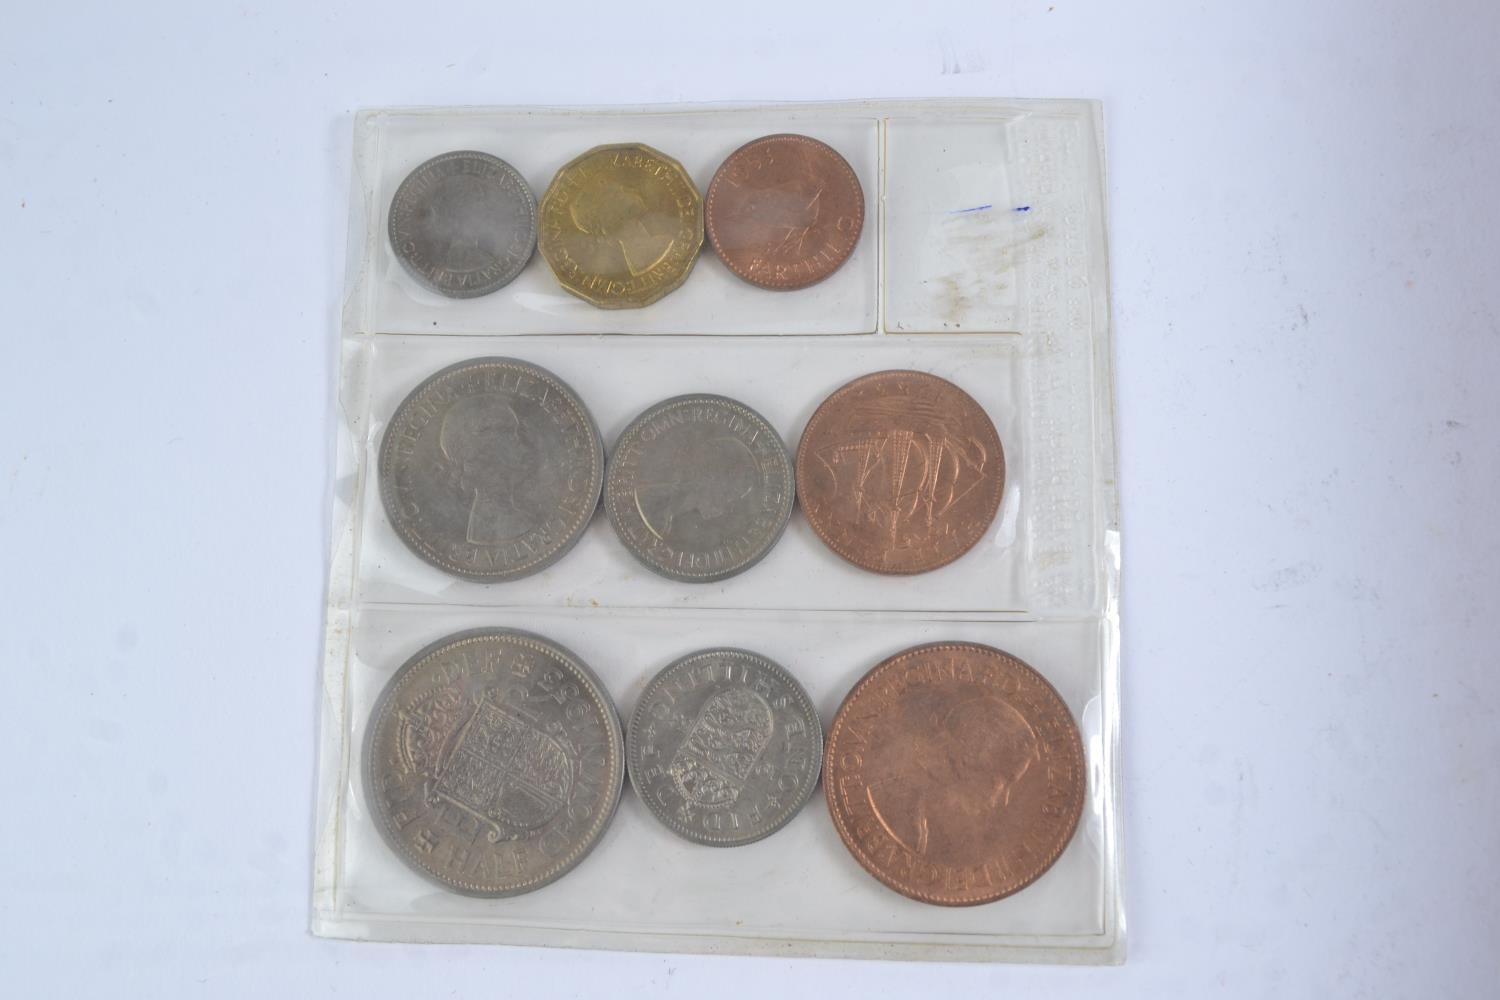 Slide box containing mostly British coins, including half crowns and commemorative  - Image 6 of 7